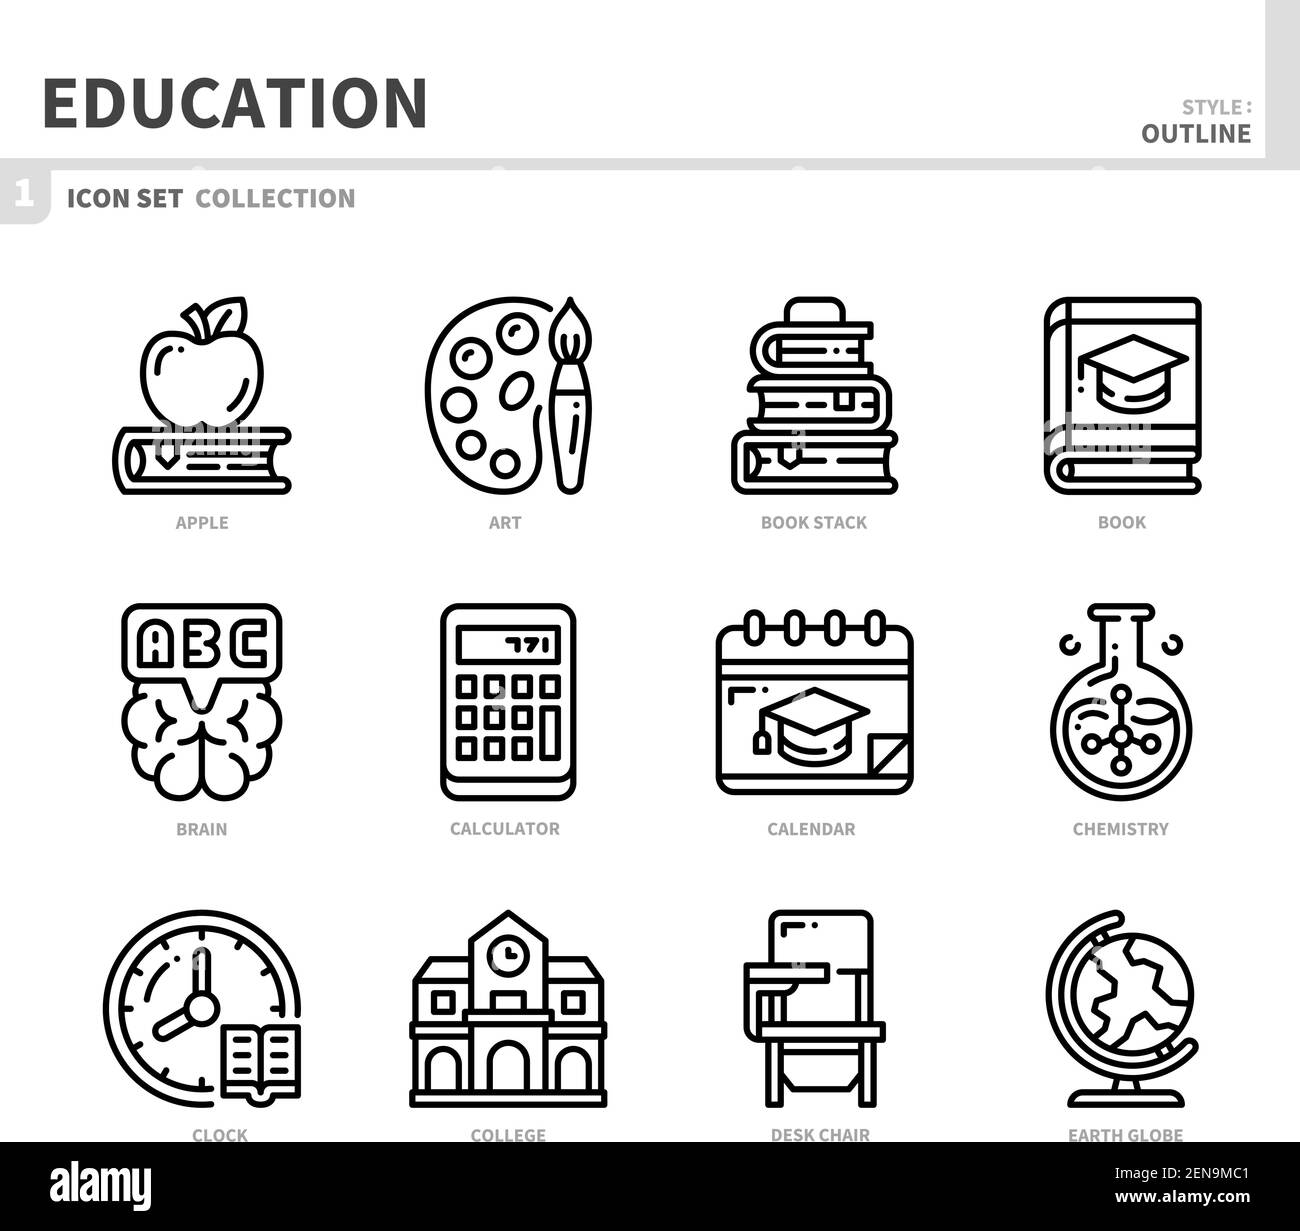 Education Icon Setoutline Stylevector And Illustration Stock Vector